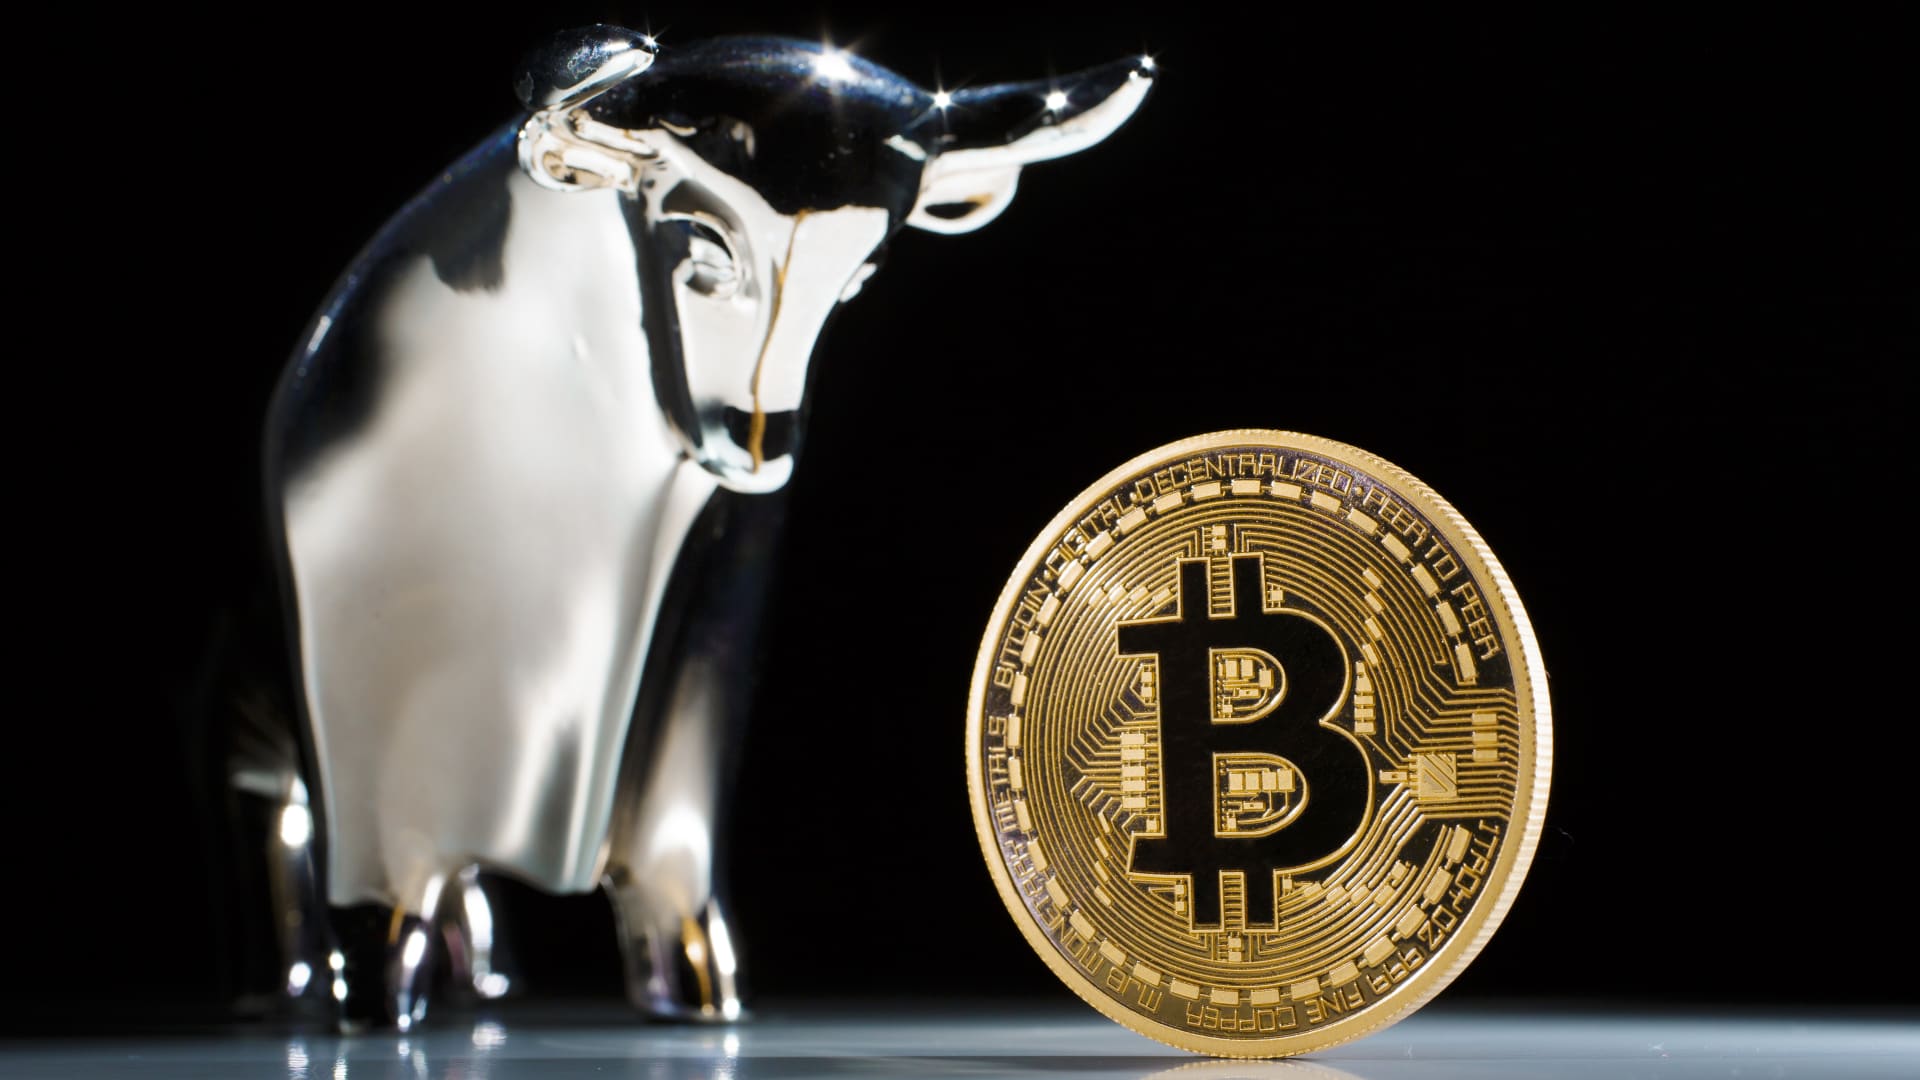 Bitcoin Outlook: Crypto may be in a bull market right now, but investors should still tread carefully